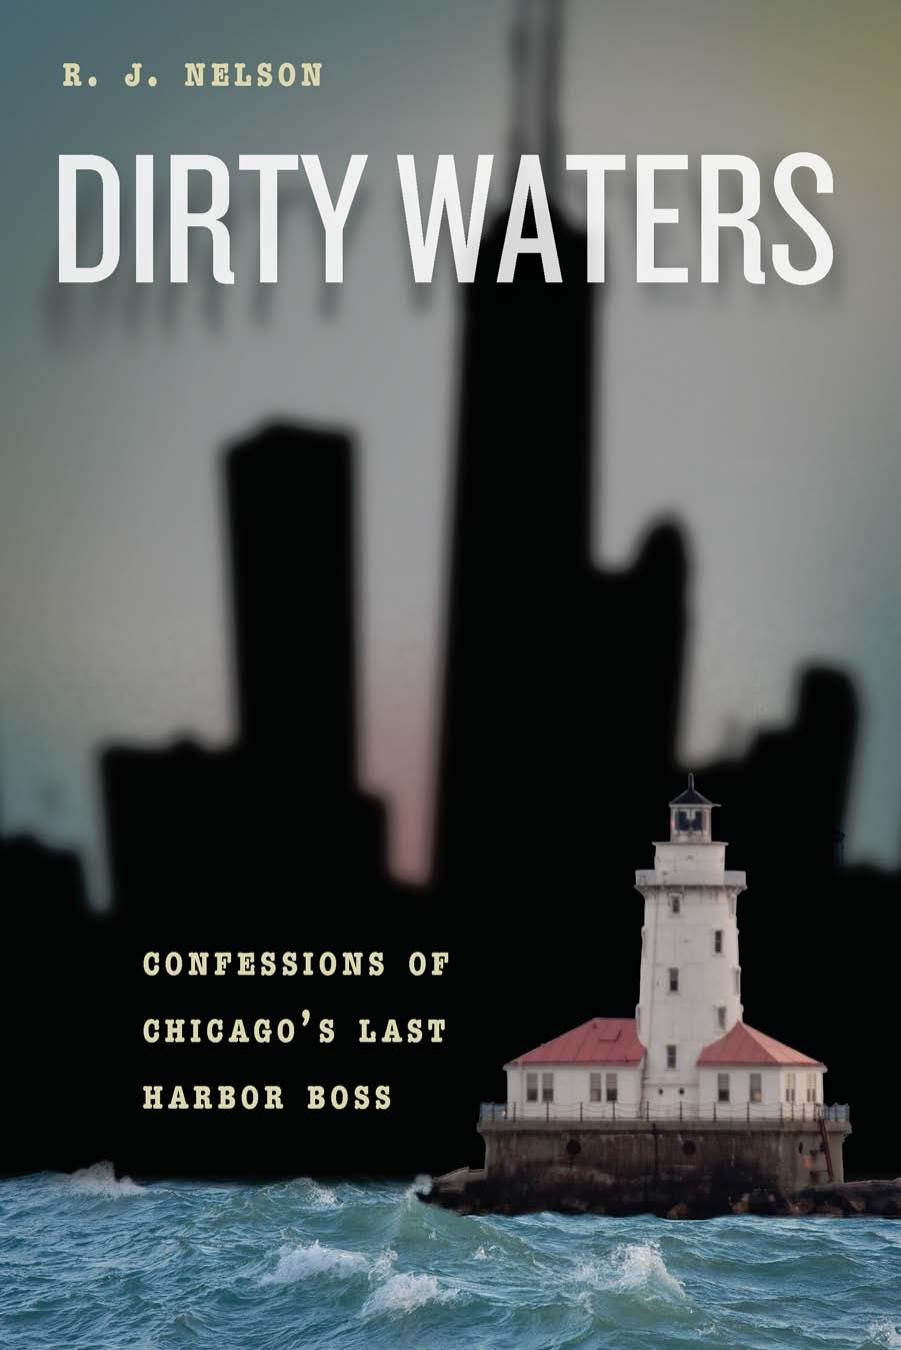 Dirty Waters: Confessions of Chicago's Last Harbor Boss by R. J. Nelson